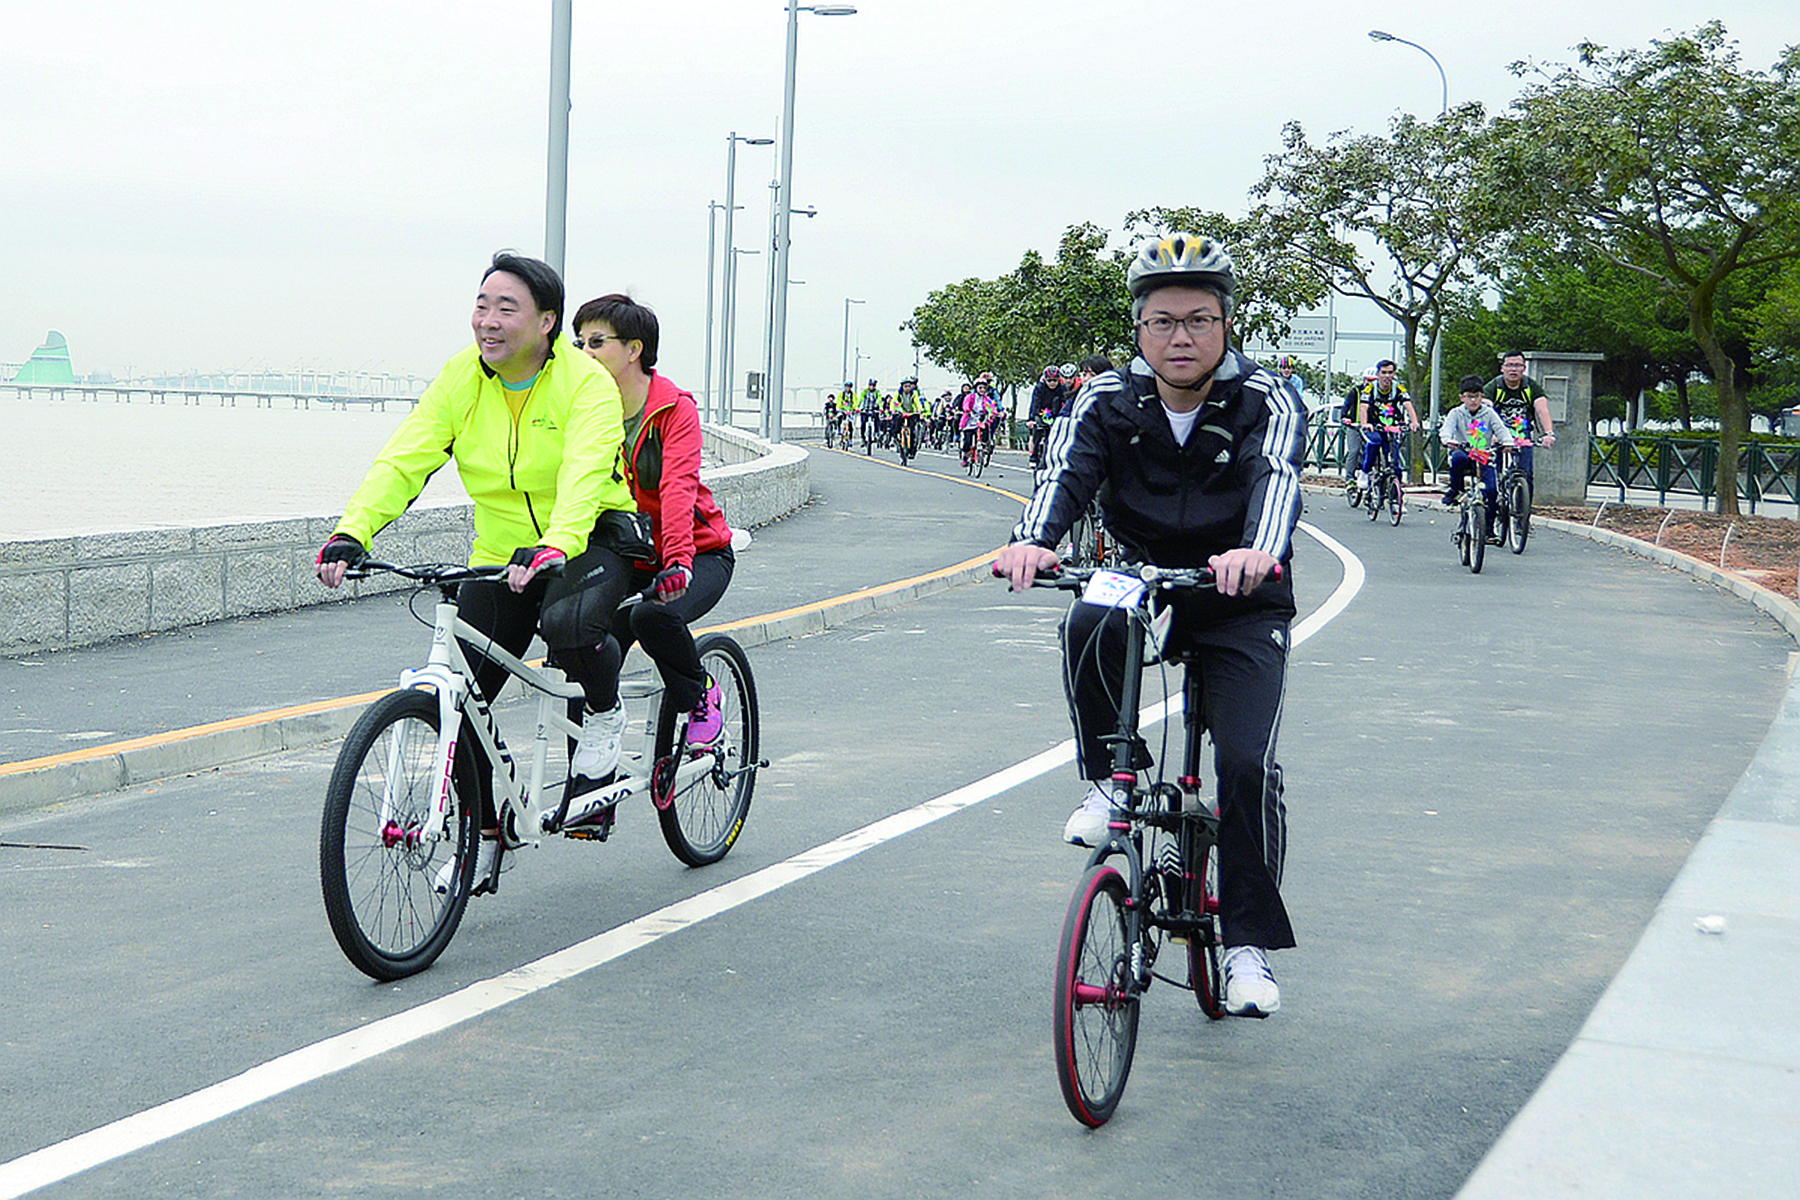 Government plans 6km long Taipa-Coloane cycle track